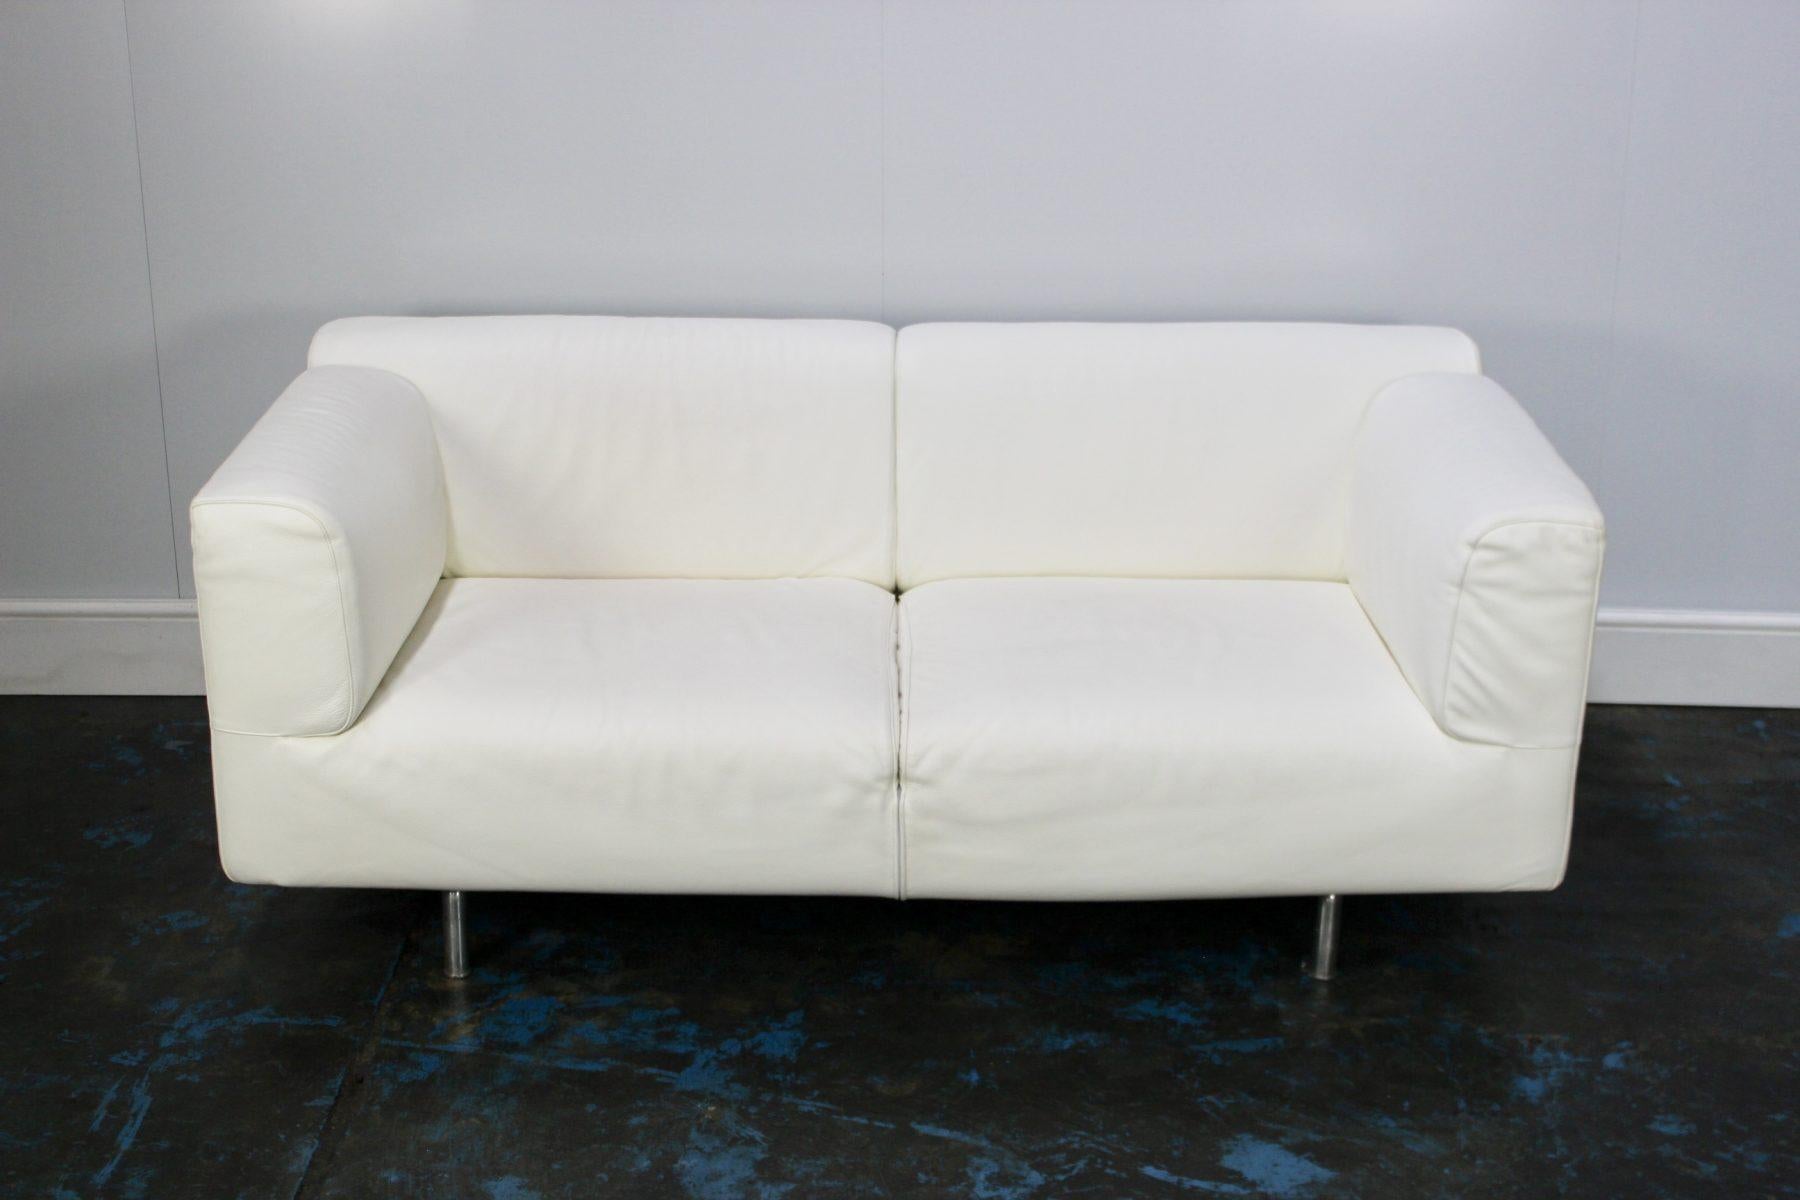 Cassina “250 Met” Large 2-Seat Sofa in Chalk White Leather In Good Condition For Sale In Barrowford, GB